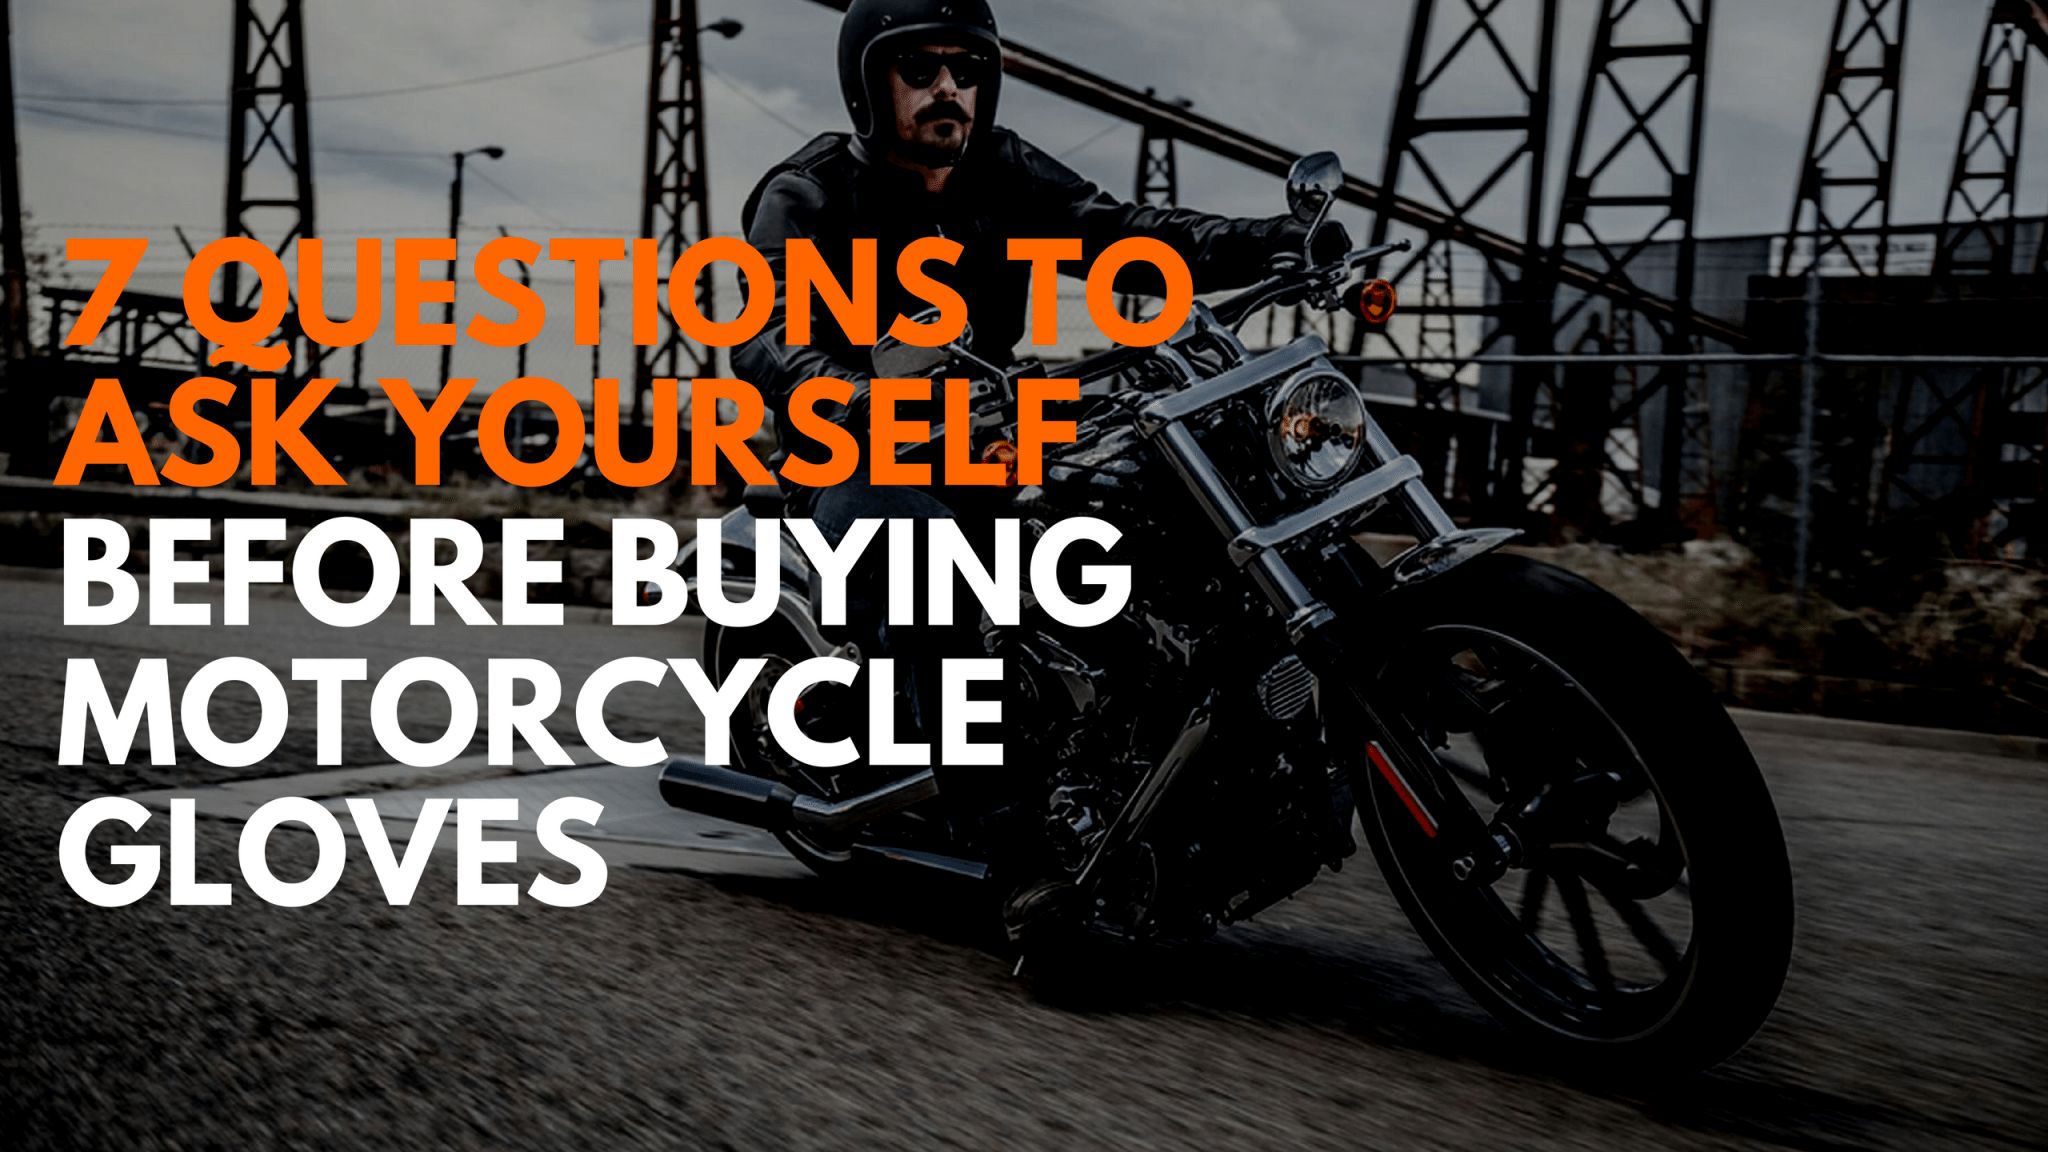 7 Questions to Ask Yourself Before Buying Motorcycle Gloves